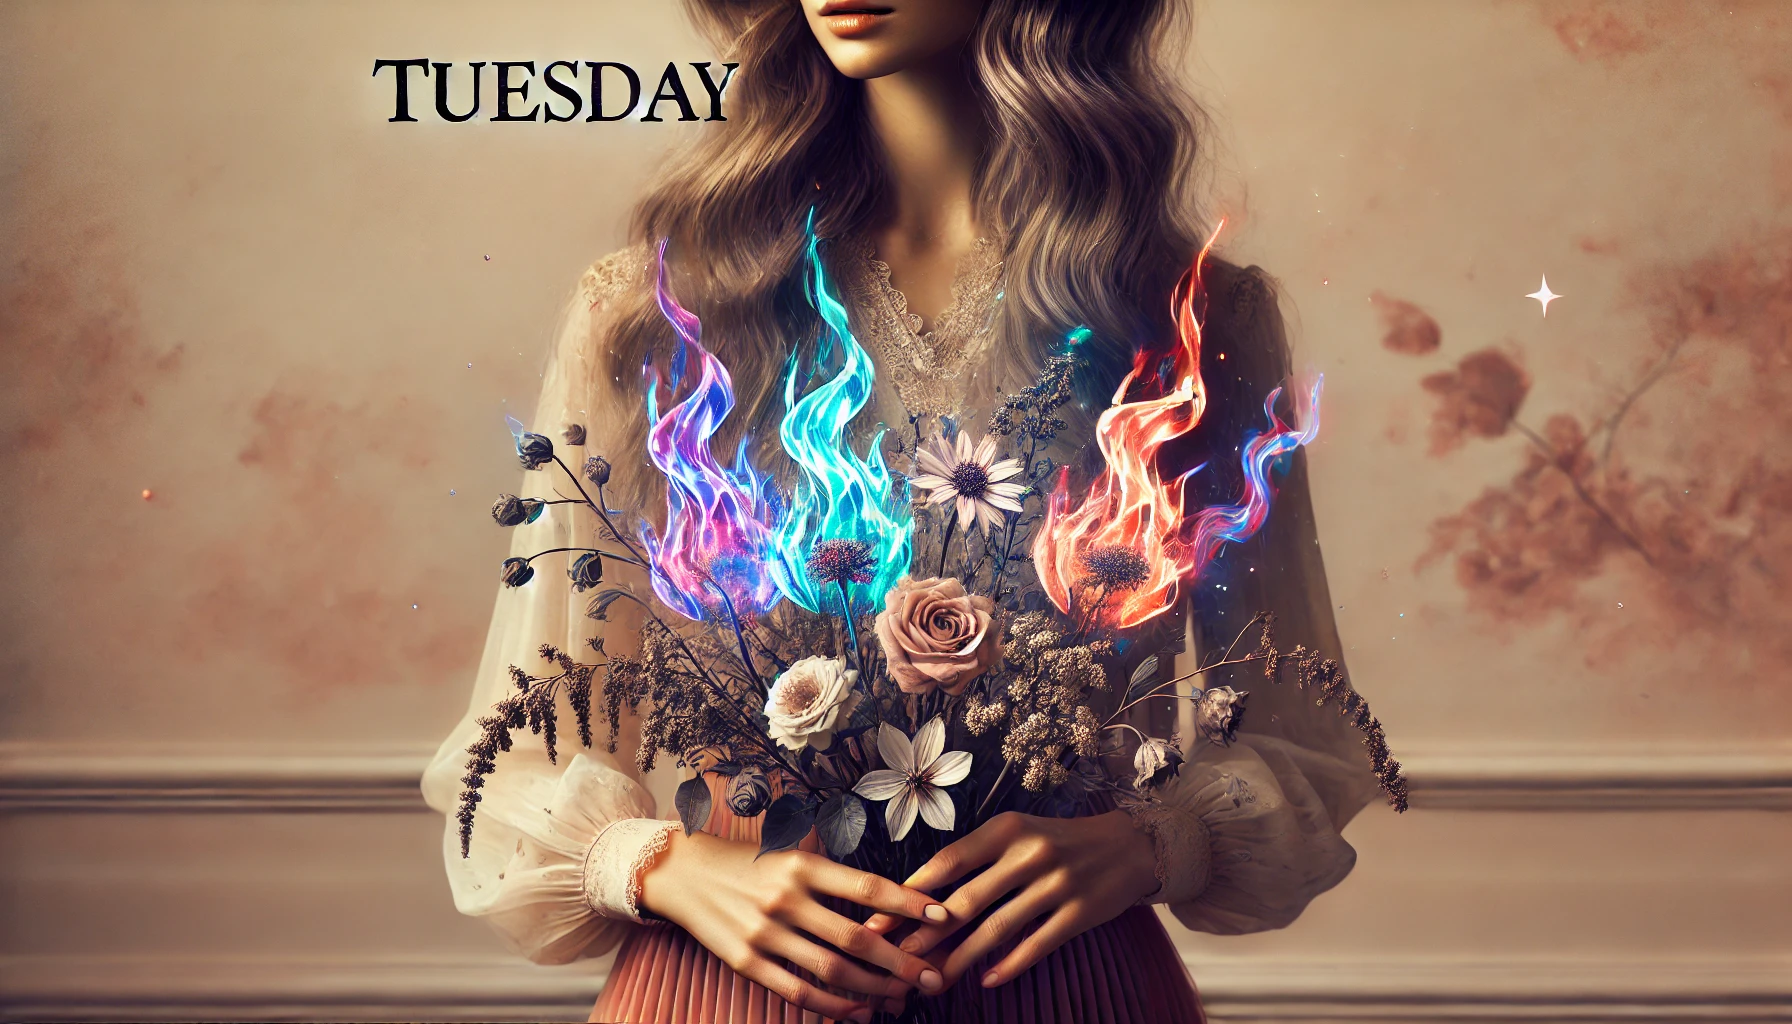 Tuesday Wishes for Her: Brighten Her Day